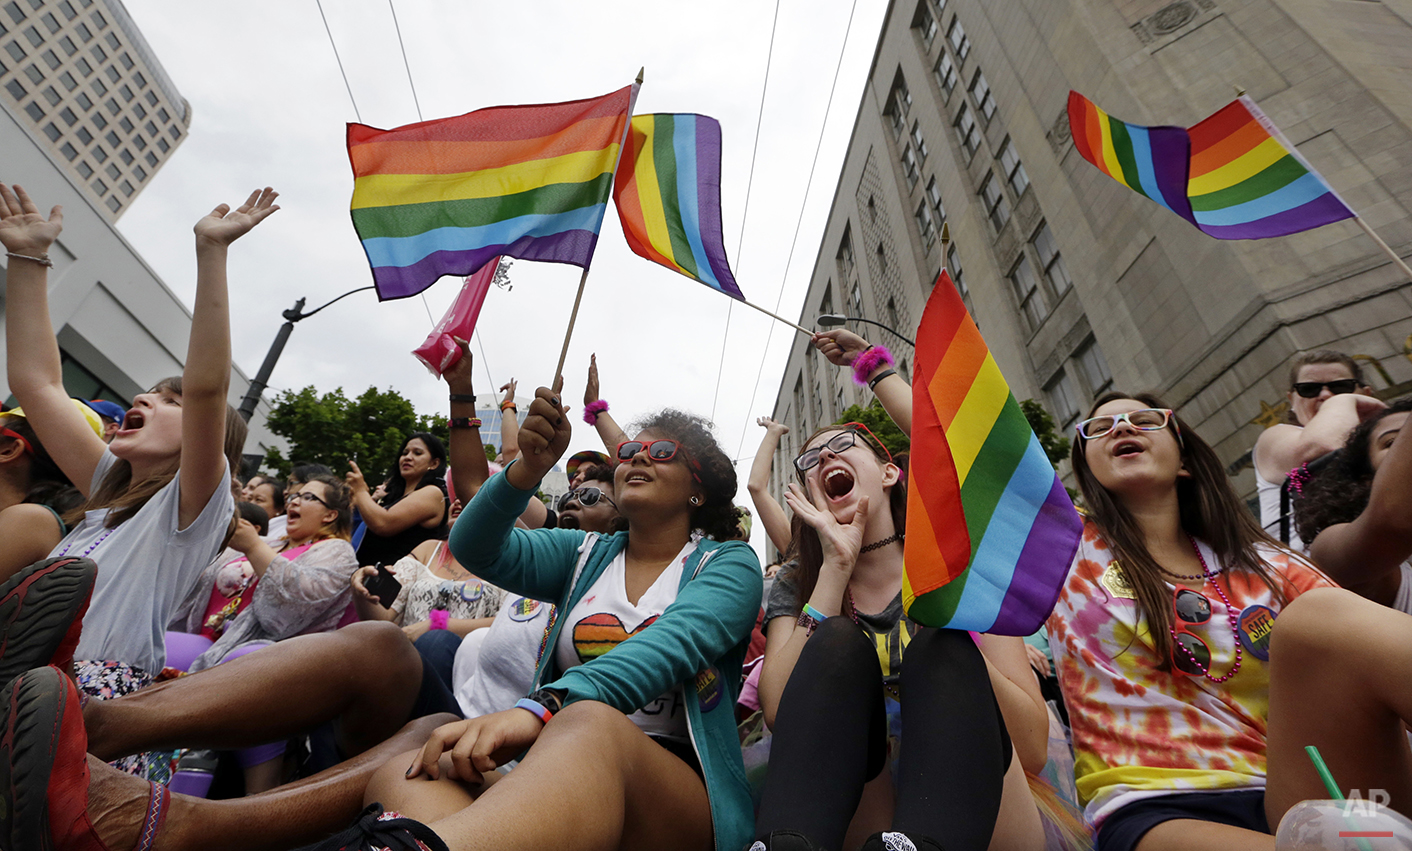  Parade viewers cheer at the 41st annual Pride Parade Sunday, June 28, 2015, in Seattle. Rainbows and good cheer were out in force Sunday as hundreds of thousands of people packed gay pride events from New York City to Seattle, San Francisco to Chica